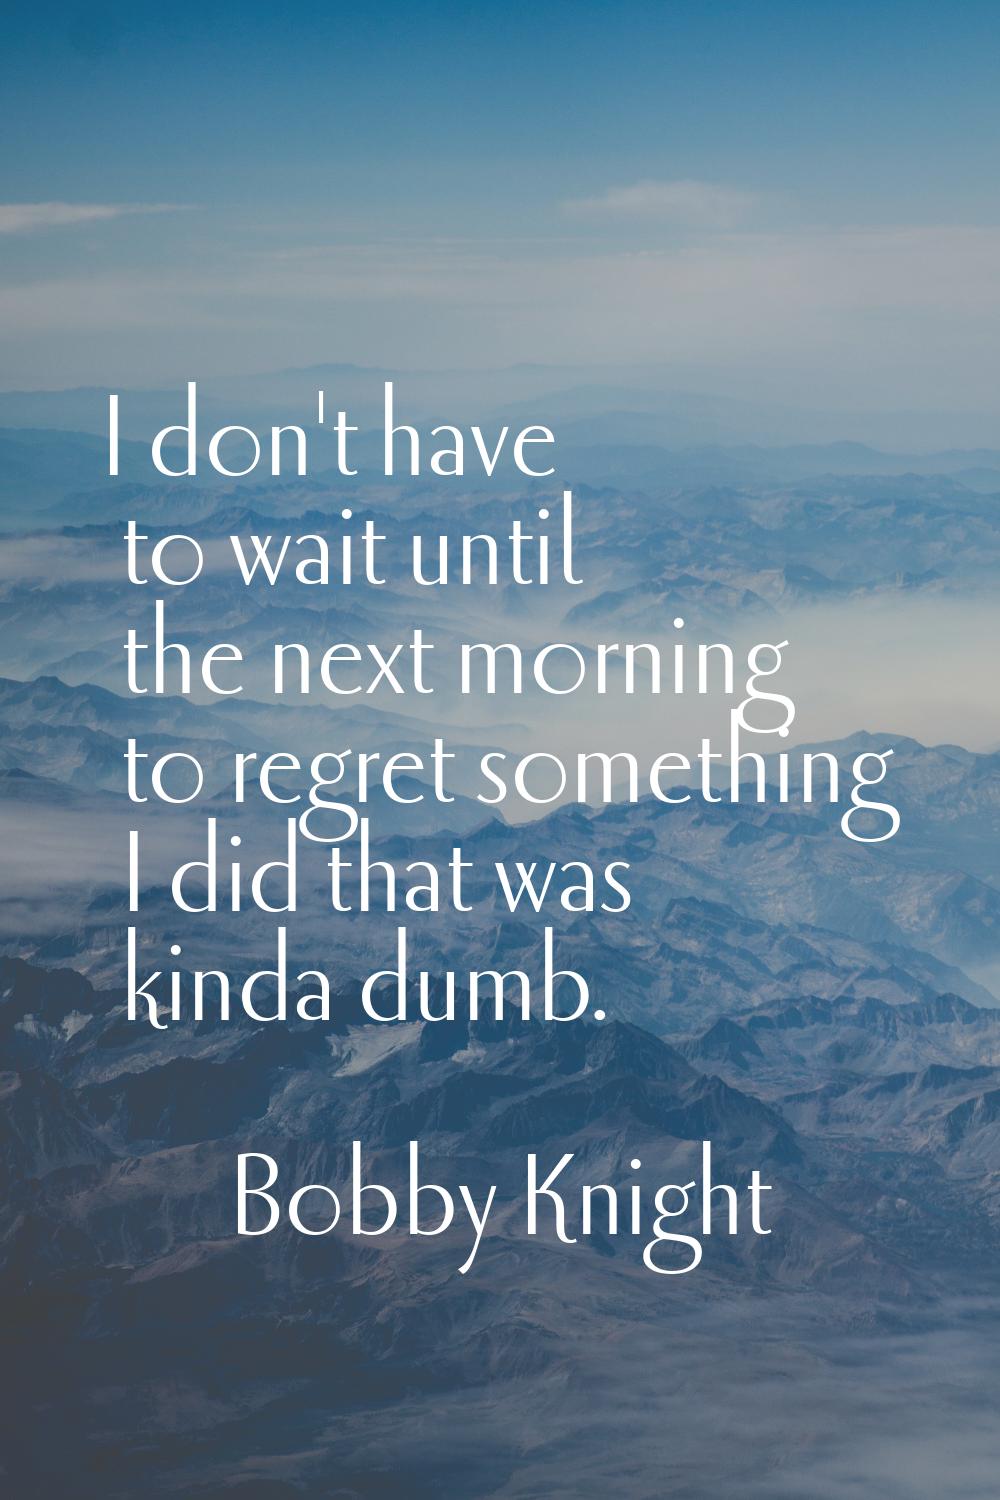 I don't have to wait until the next morning to regret something I did that was kinda dumb.